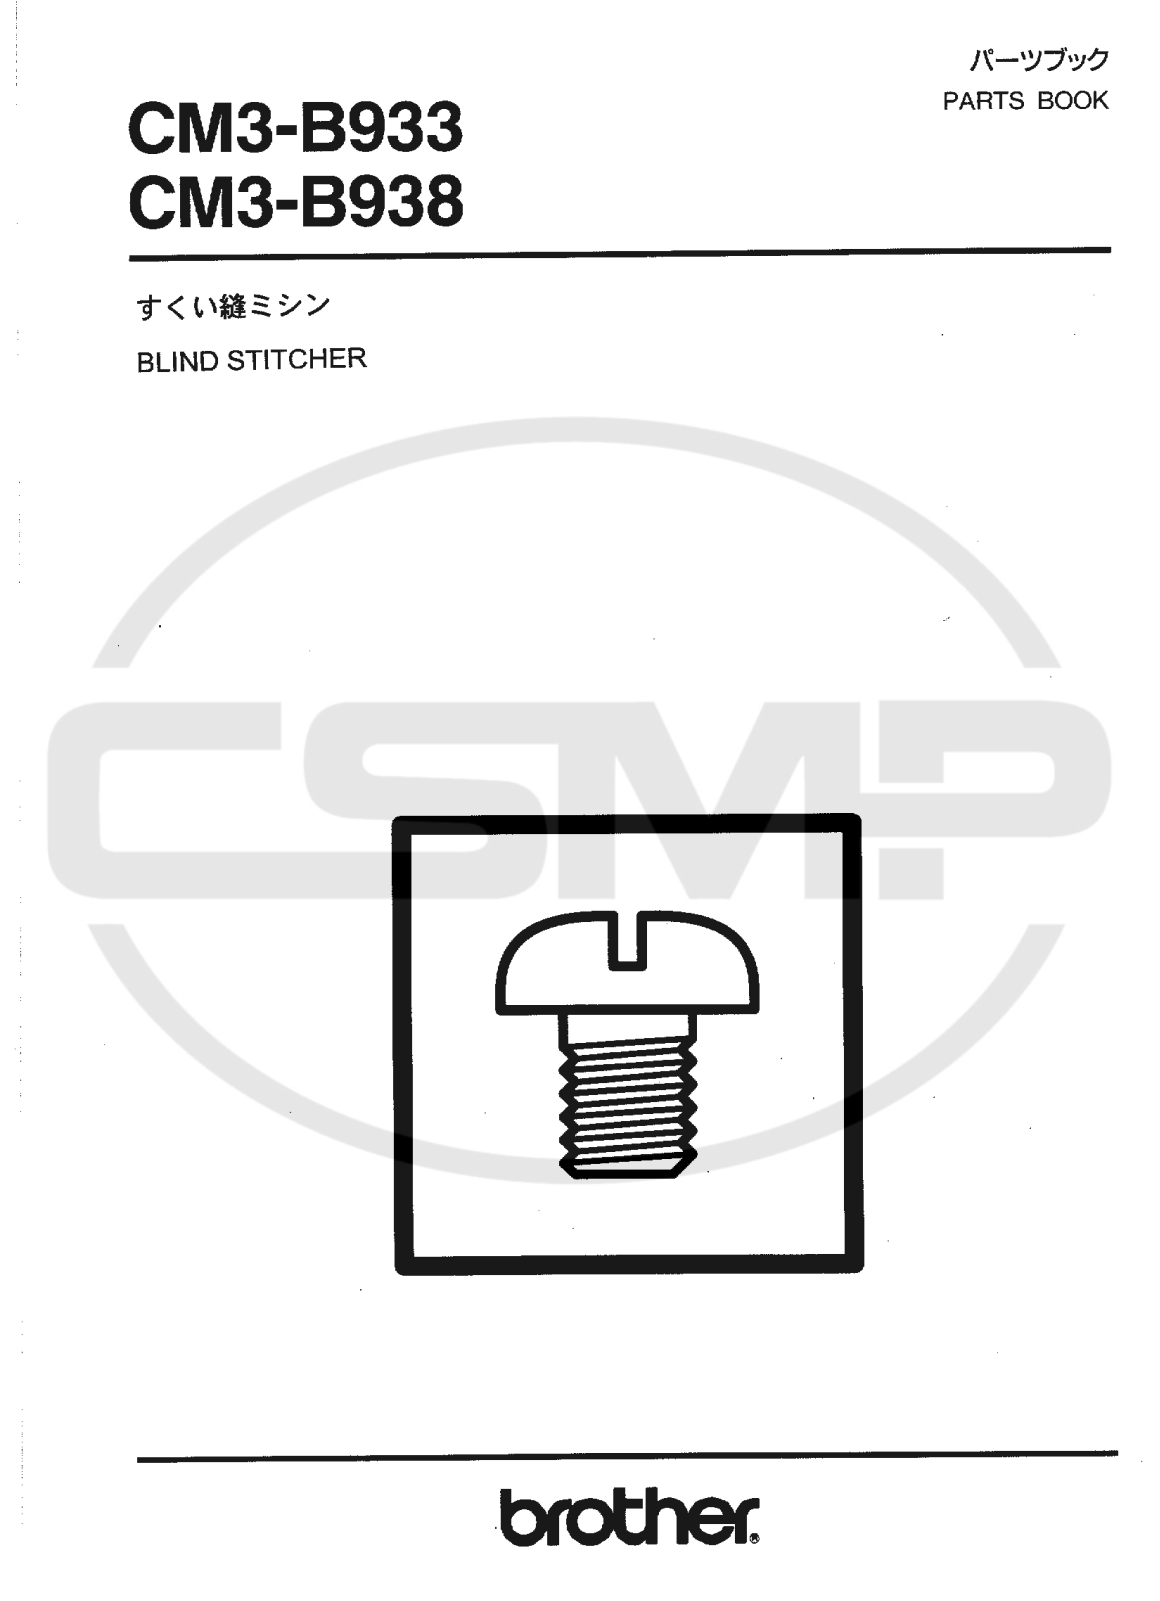 Brother CM3 B938 Parts Book